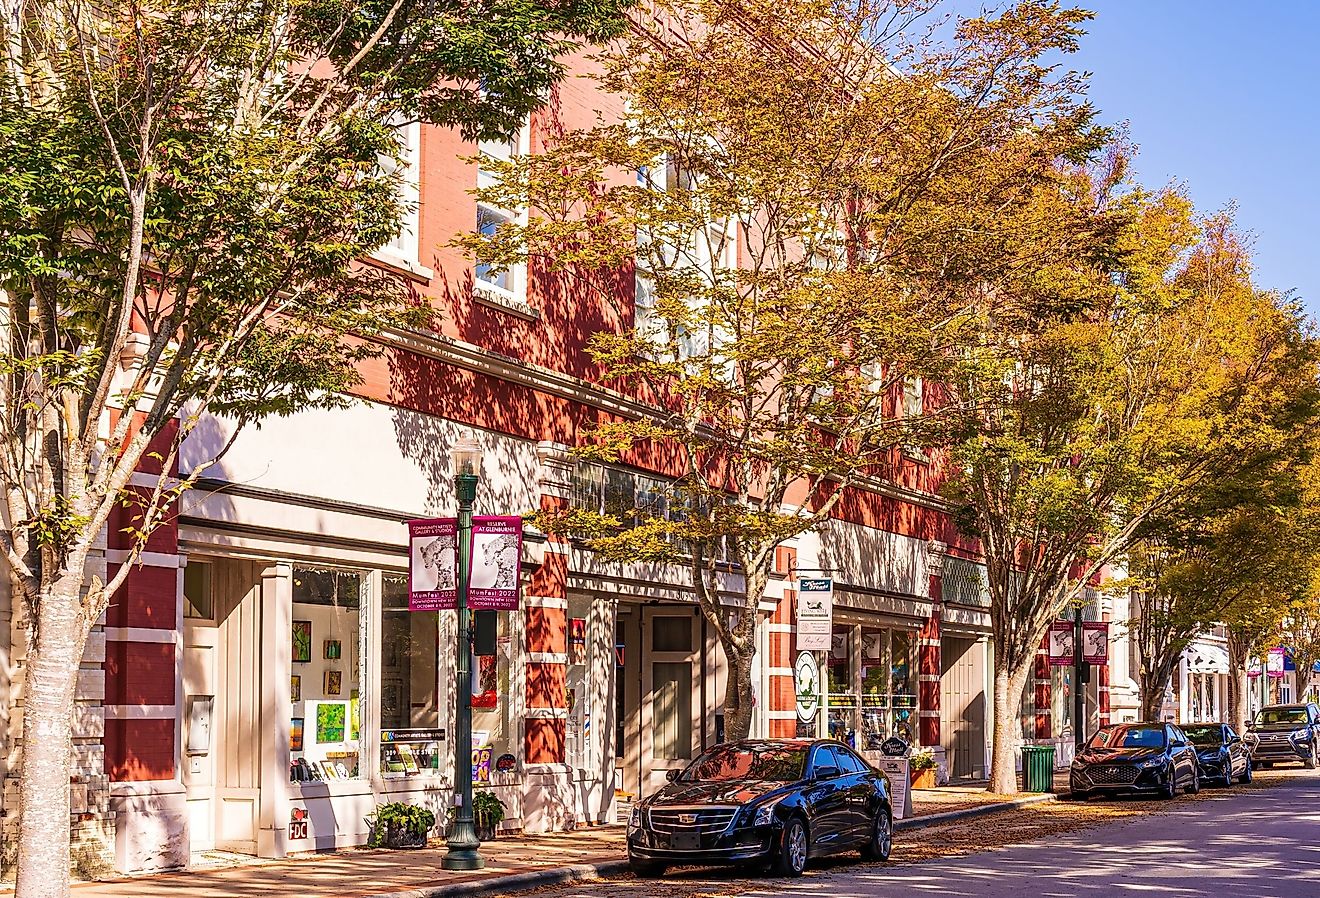 Shady trees lining the sidewalk in New Bern's Historic District. Image credit Wileydoc via Shutterstock.